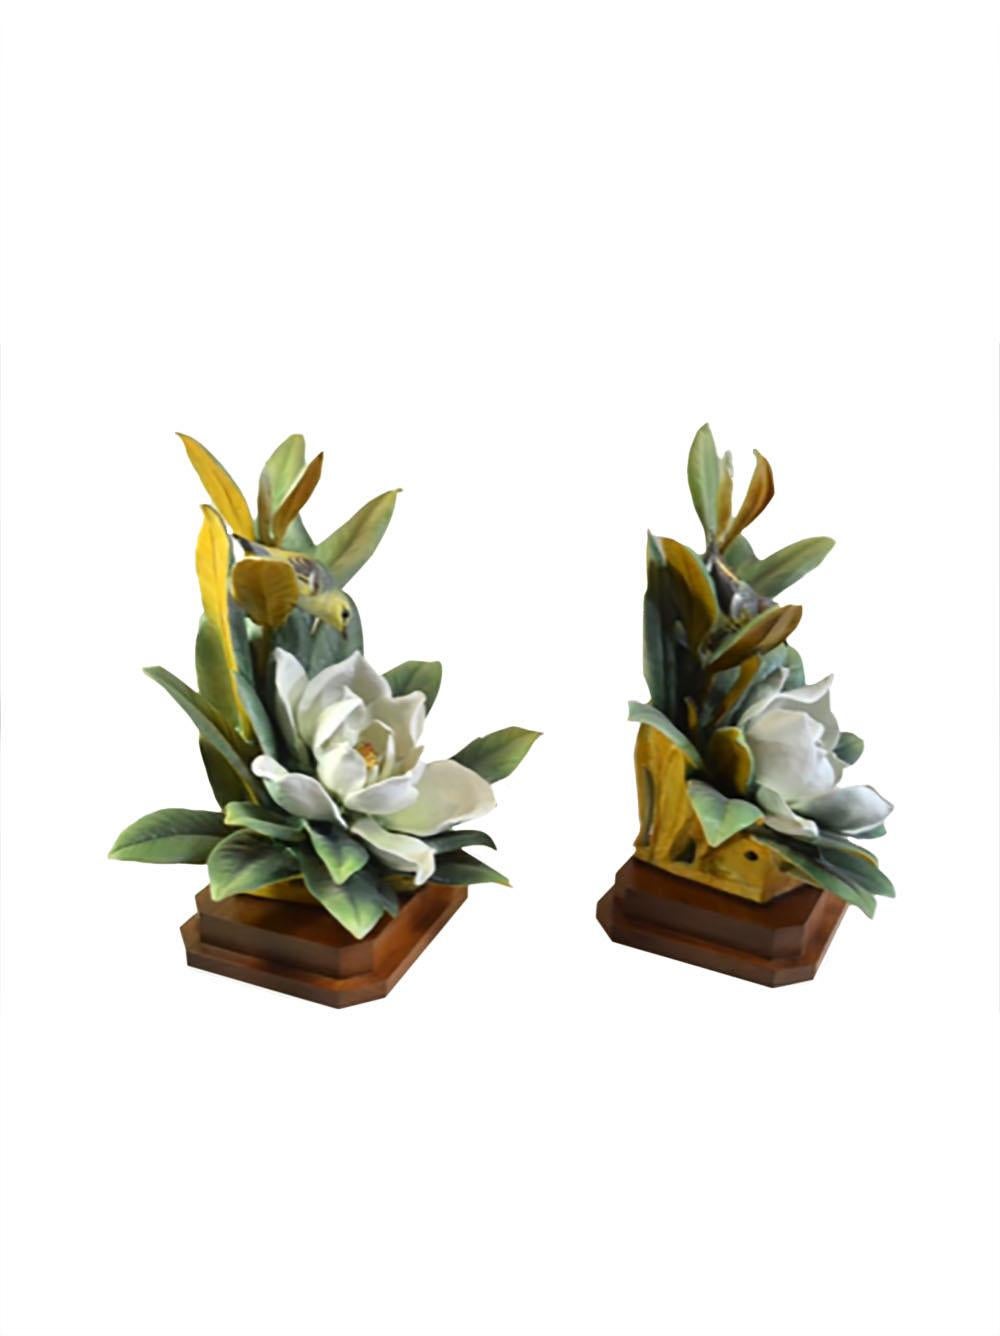 A Limited Edition, hand painted, English fine bone china pair of Royal Worcester Magnolia Warblers. One of the most important pair in the American Bird Series. Shape number: 3429 & 3430. Premier size, authentic hallmark.